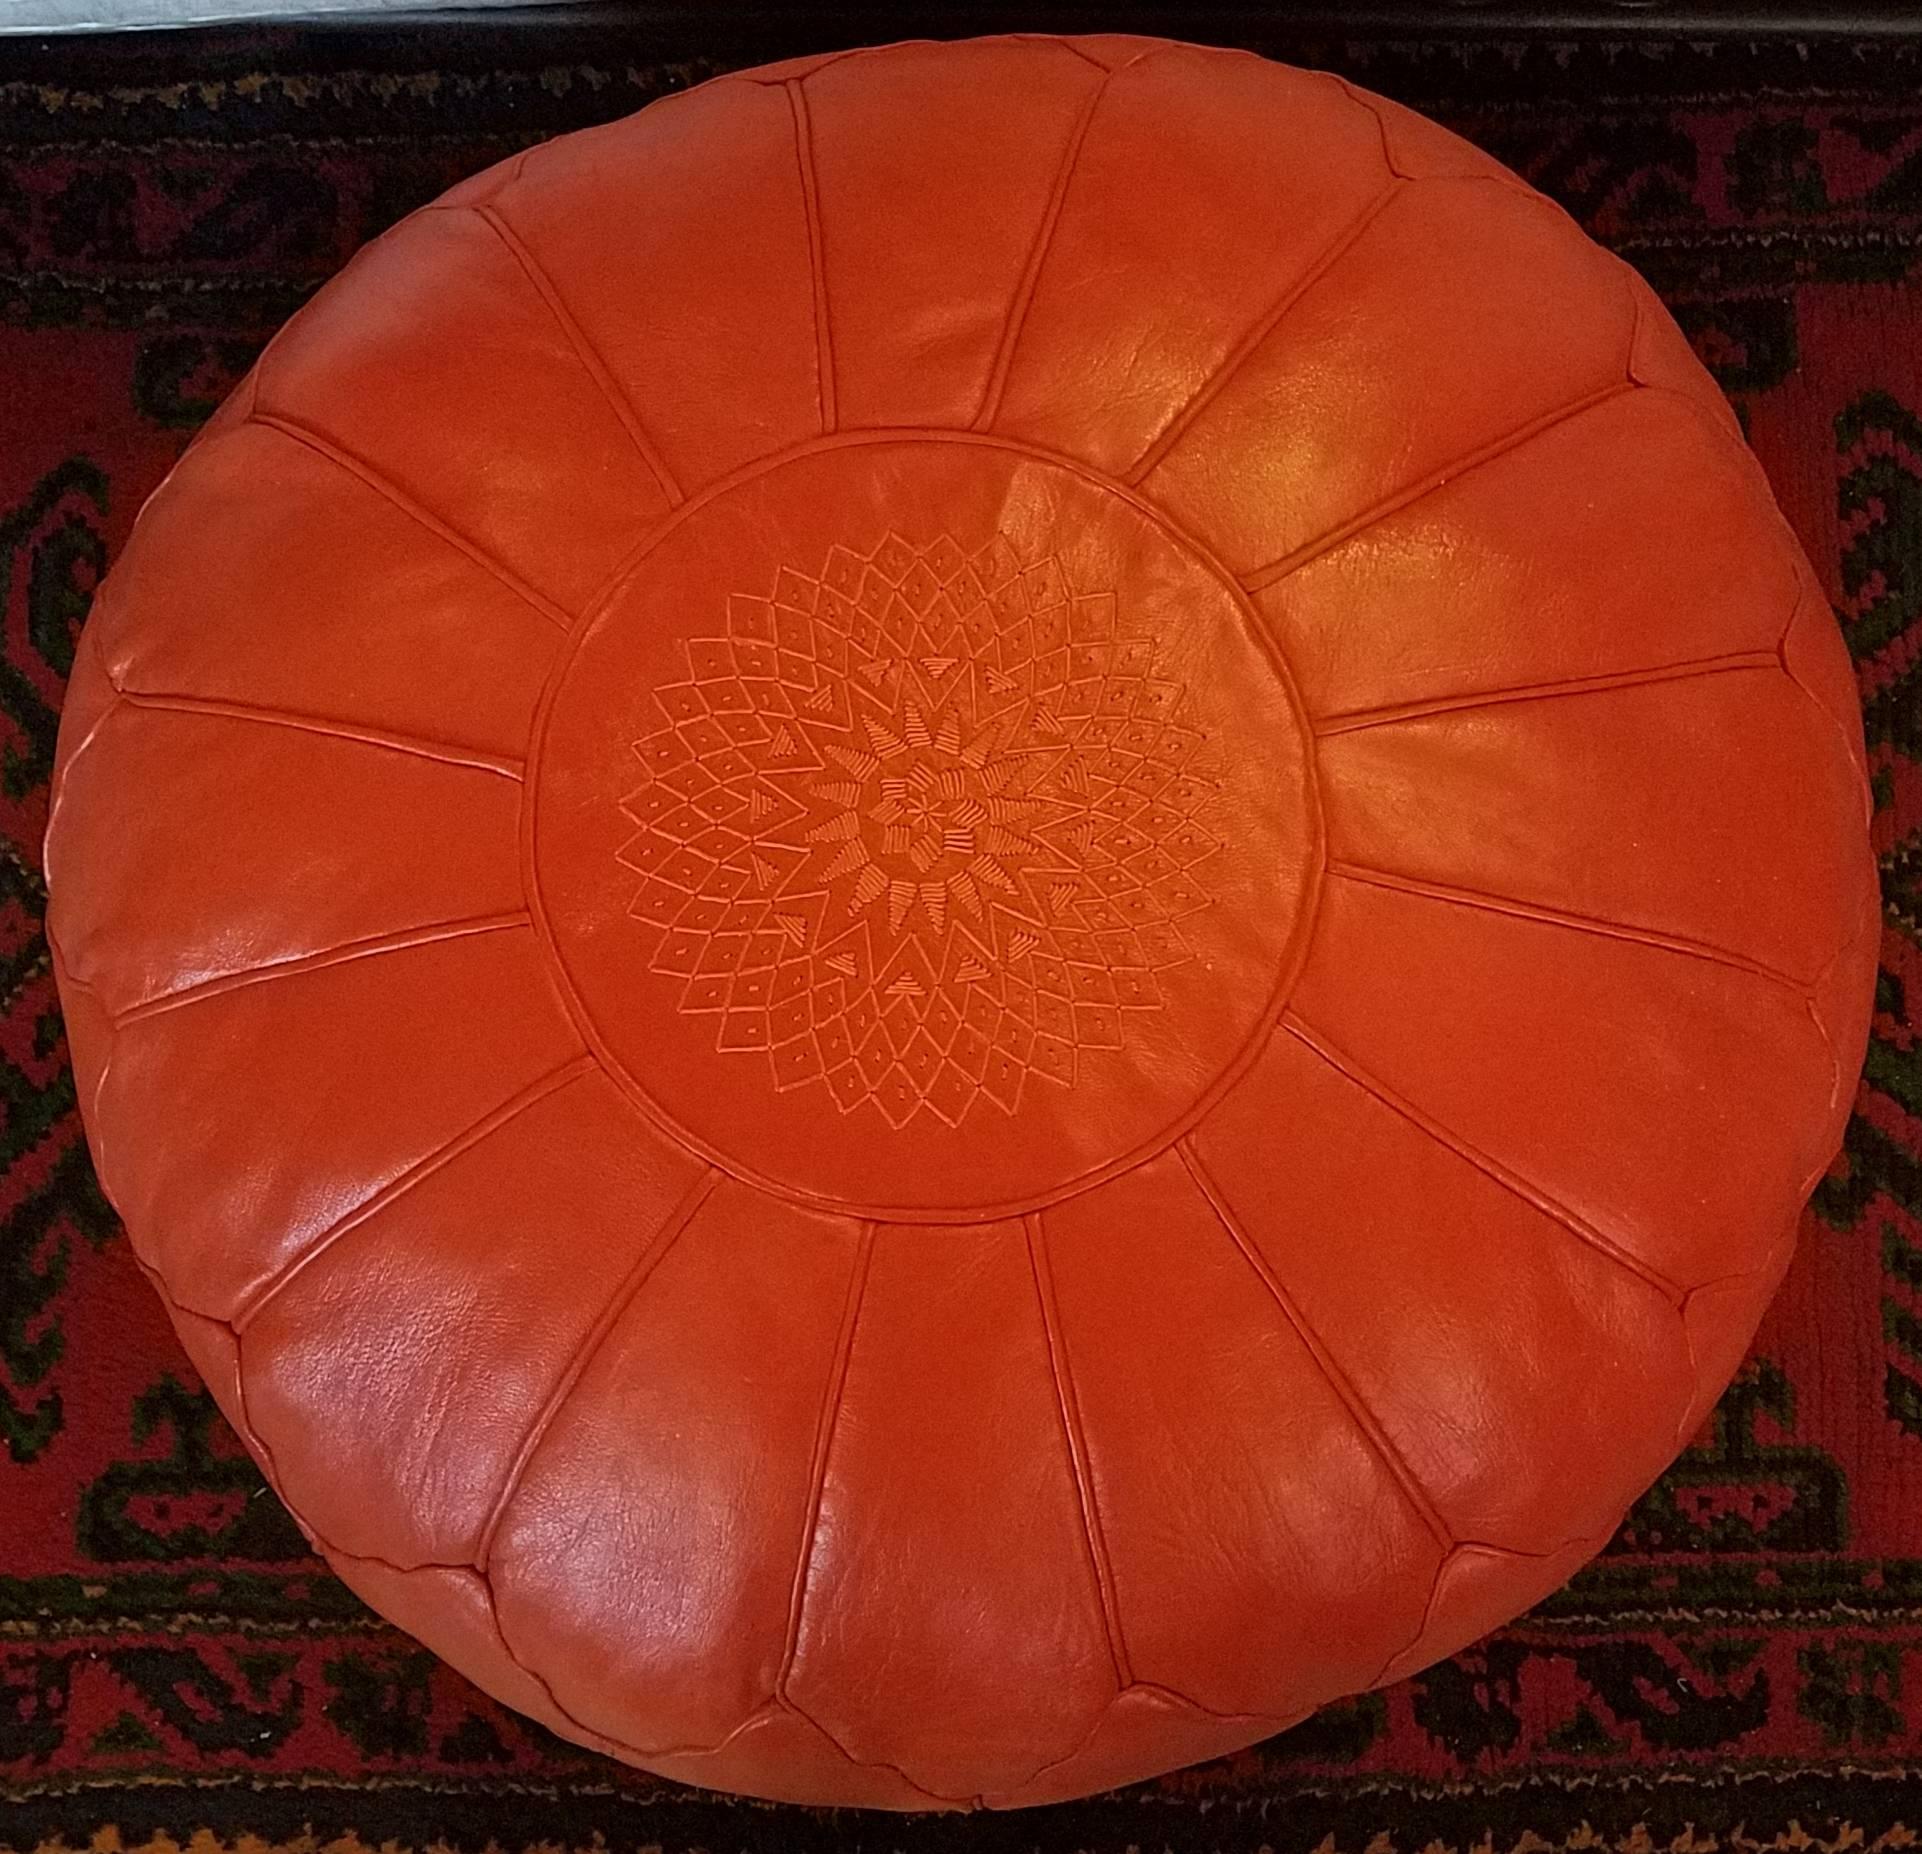 Poufs and ottomans have been around for a very long time, as many cultures prefer low seating for meals and family gatherings. We, at Living Morocco, carry a wide variety of leather poufs and ottomans, fabric hassocks, and leather camel